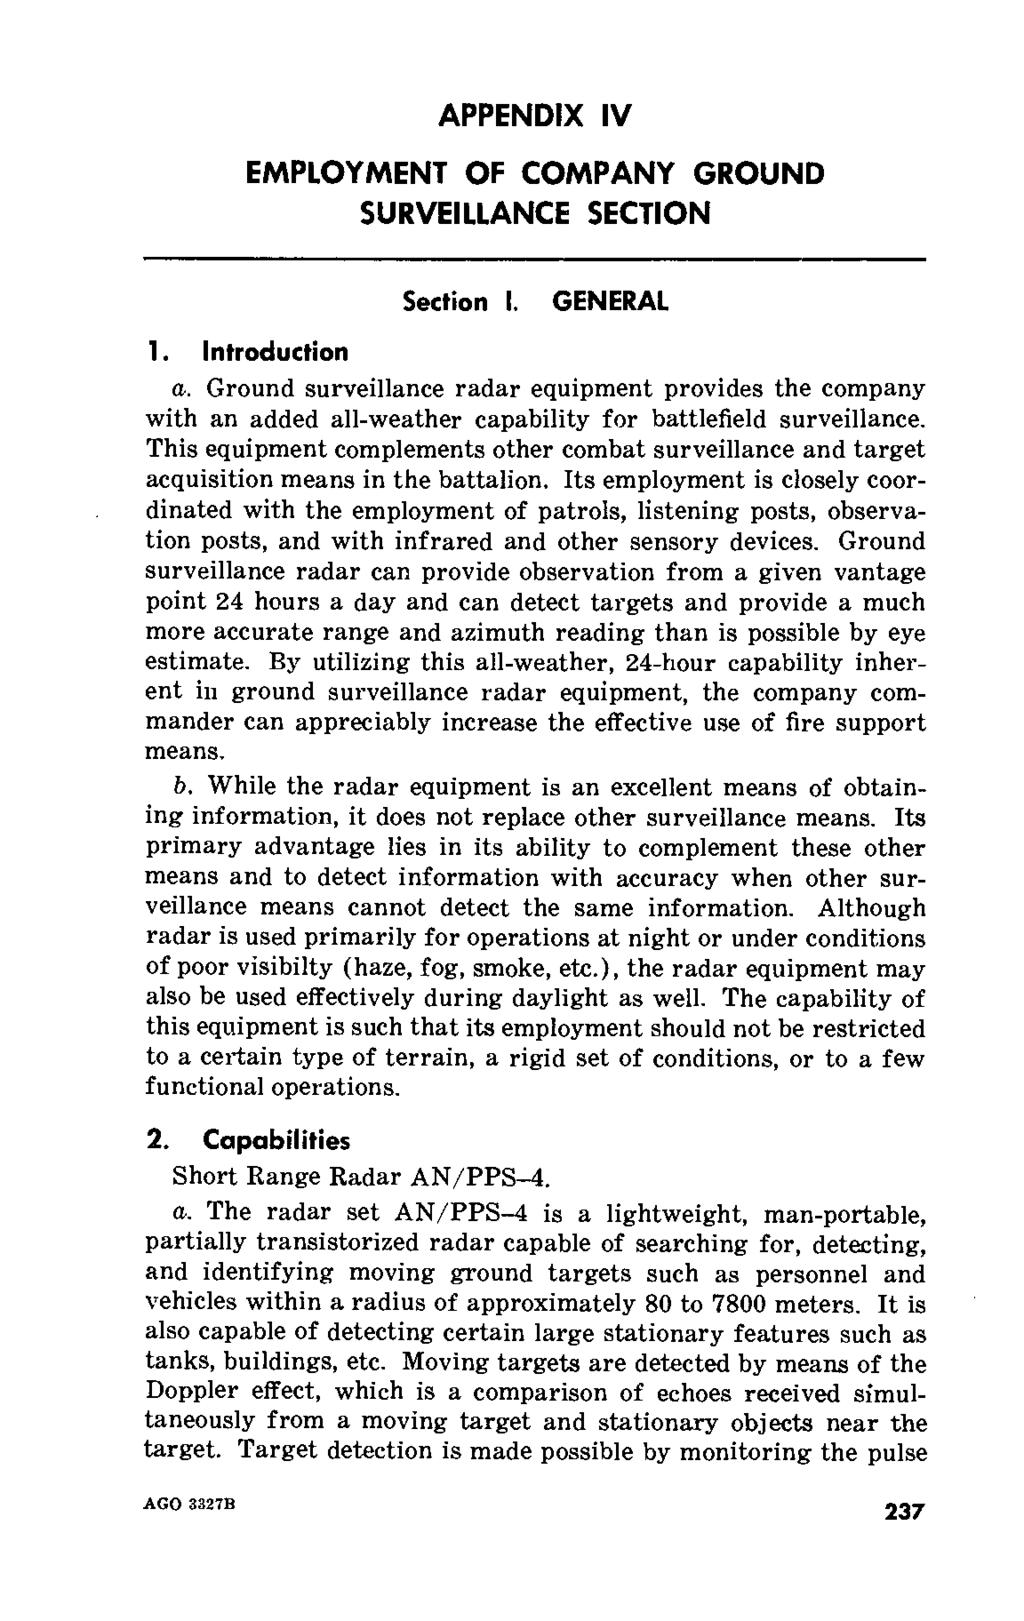 APPENDIX IV EMPLOYMENT OF COMPANY GROUND SURVEILLANCE SECTION Section I. GENERAL 1. Introduction a.